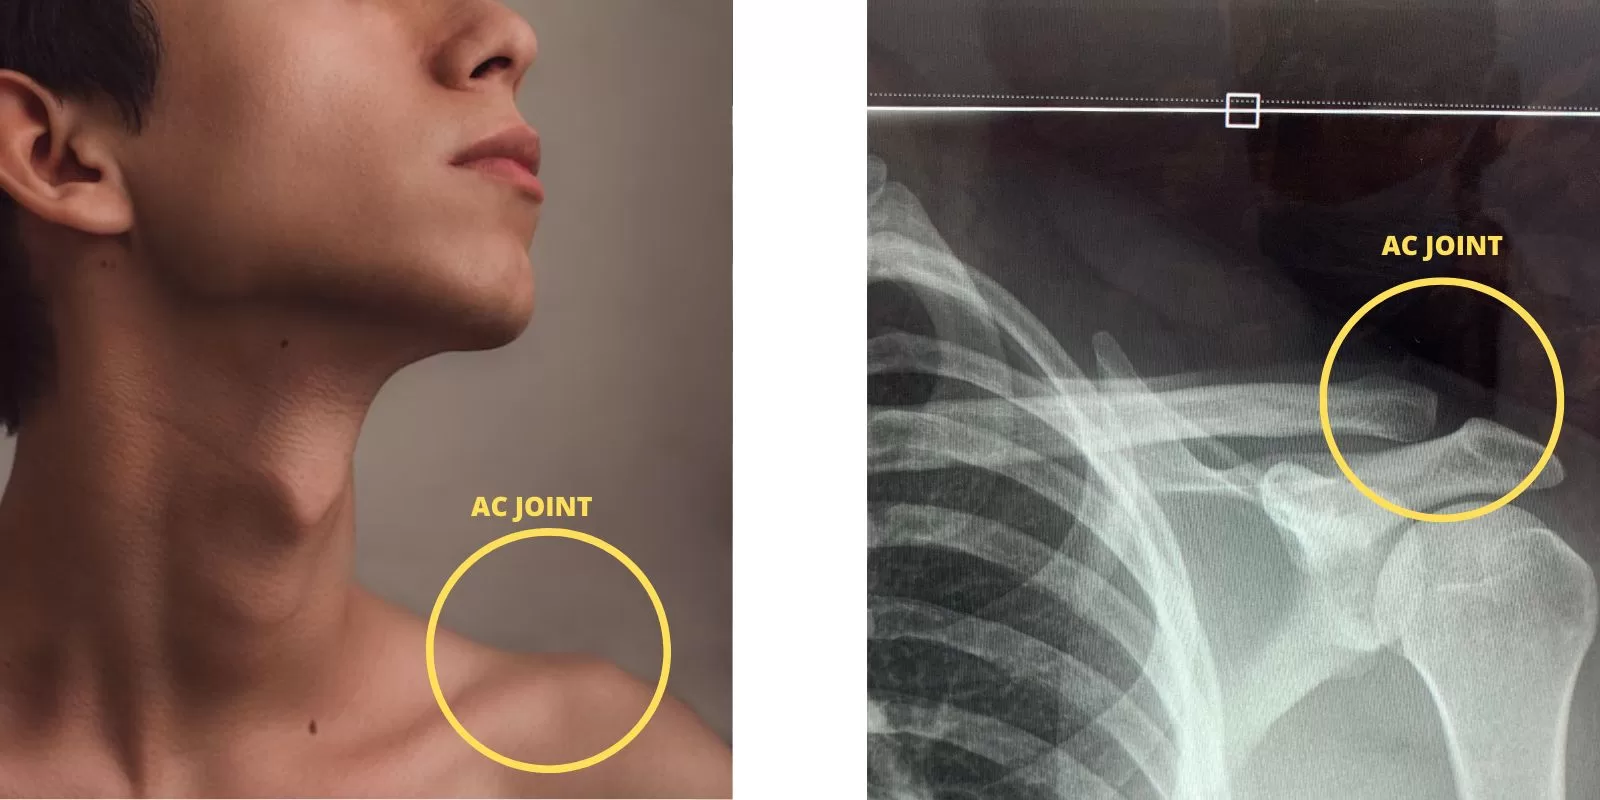 AC JOINT in a picture and x-ray